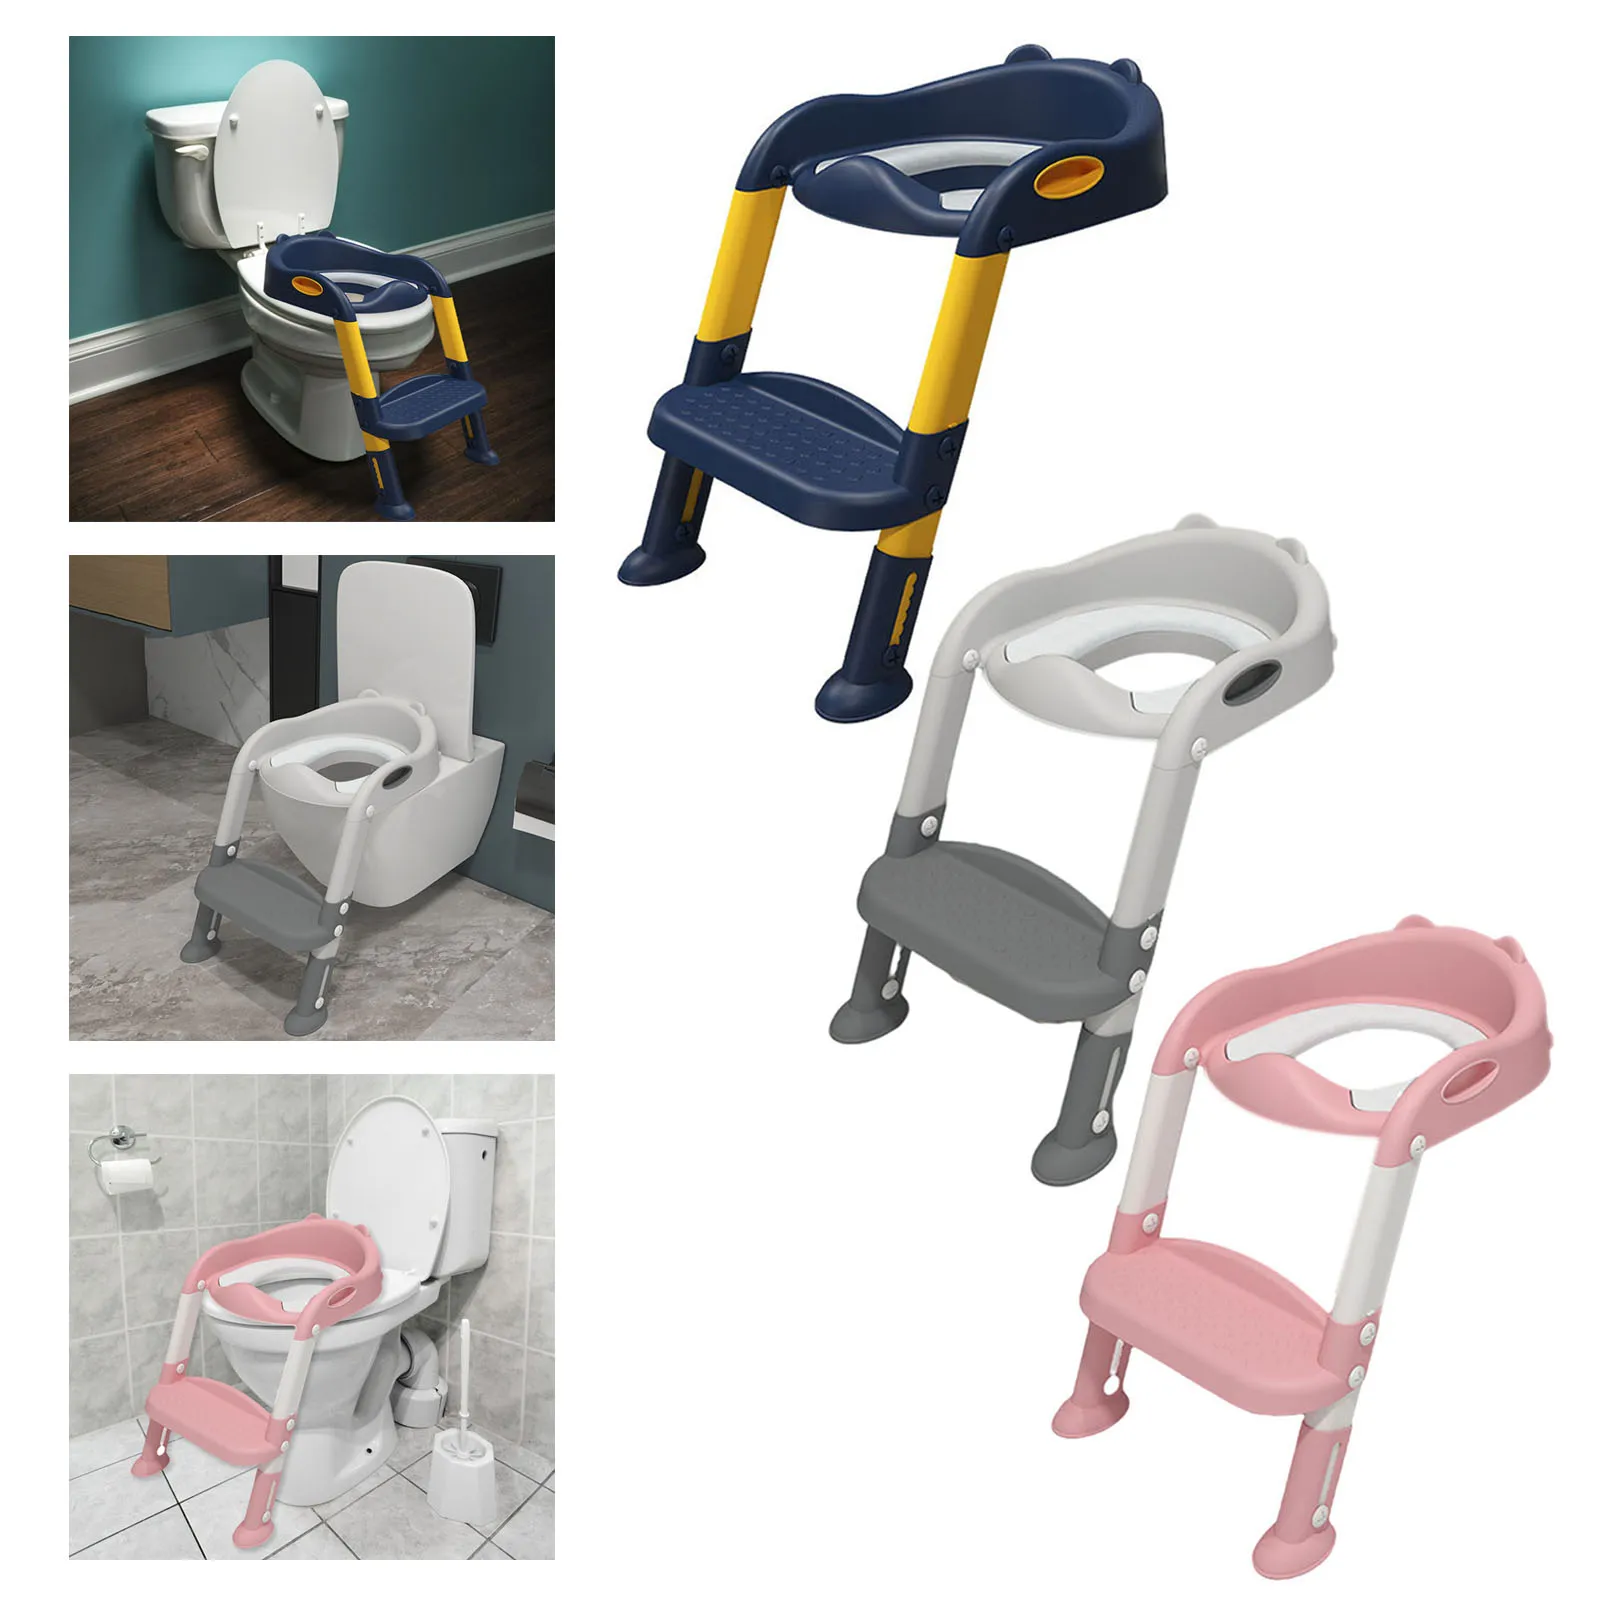 Children Toilet Seat Stool Collapsible Adjustable Step Stool Anti-Slip Comfortable Potty Child Toddlers